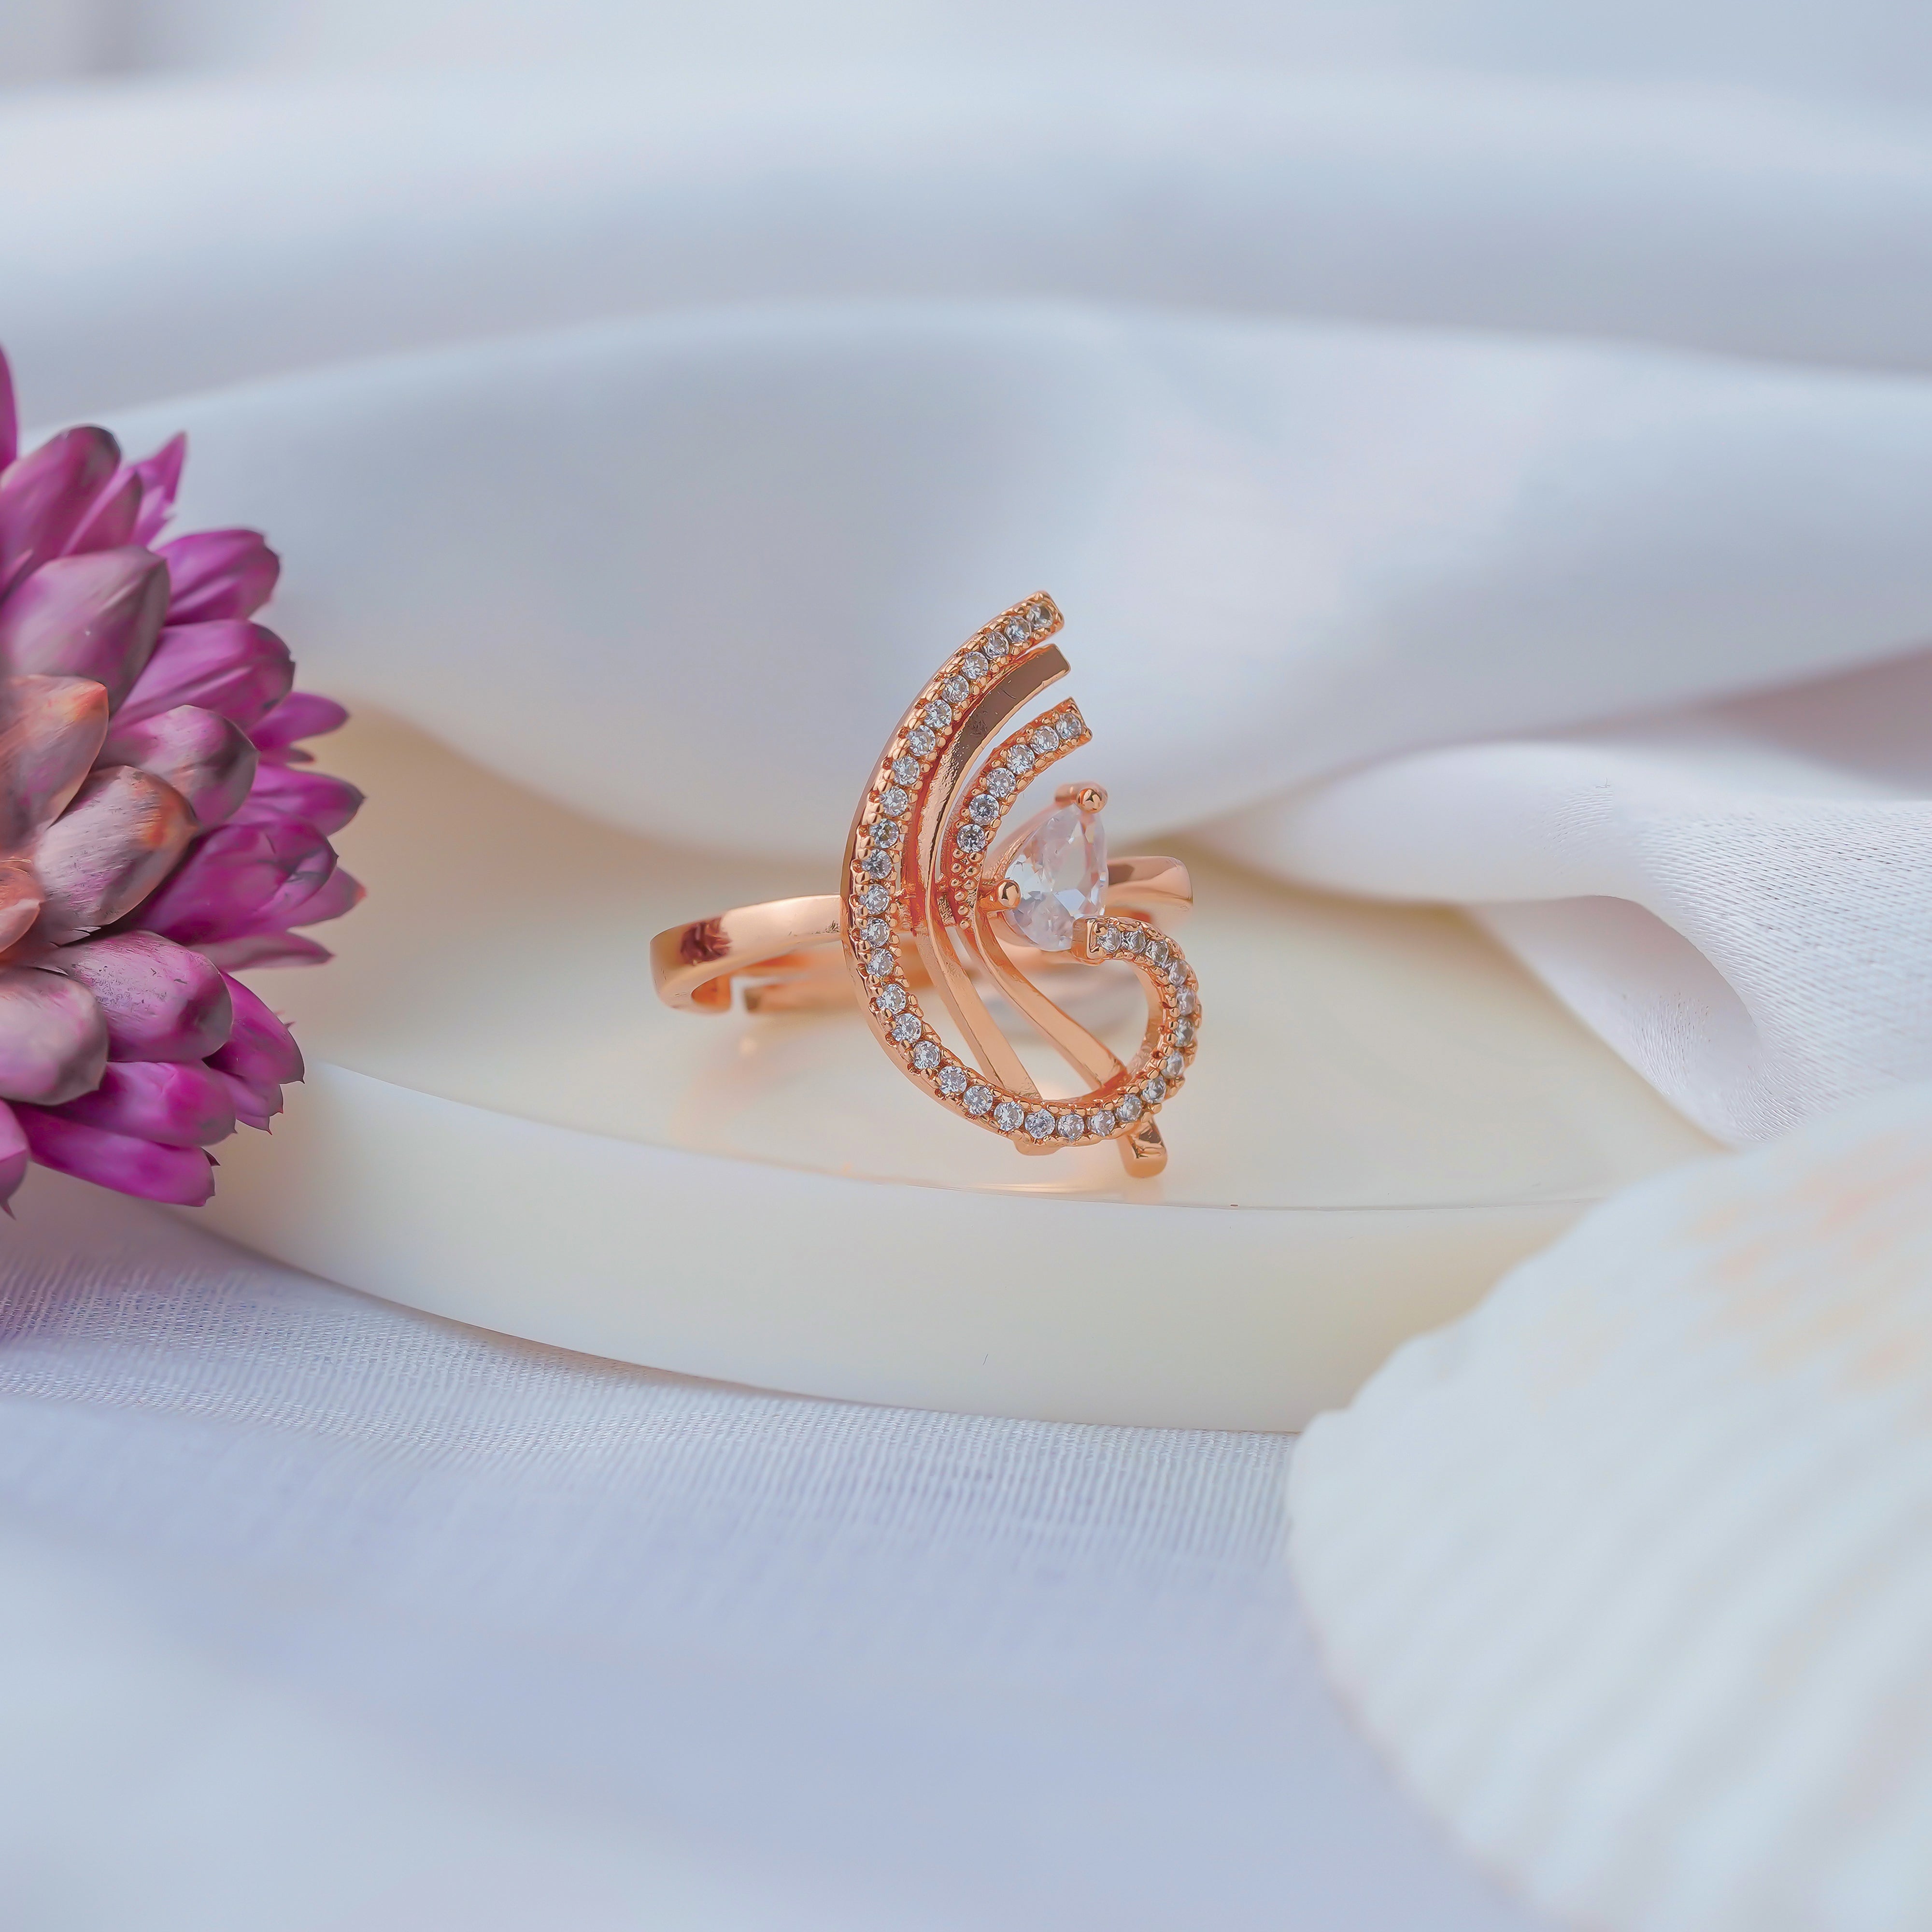 Contemporary Charm: Handmade Rose Gold Artificial Ring